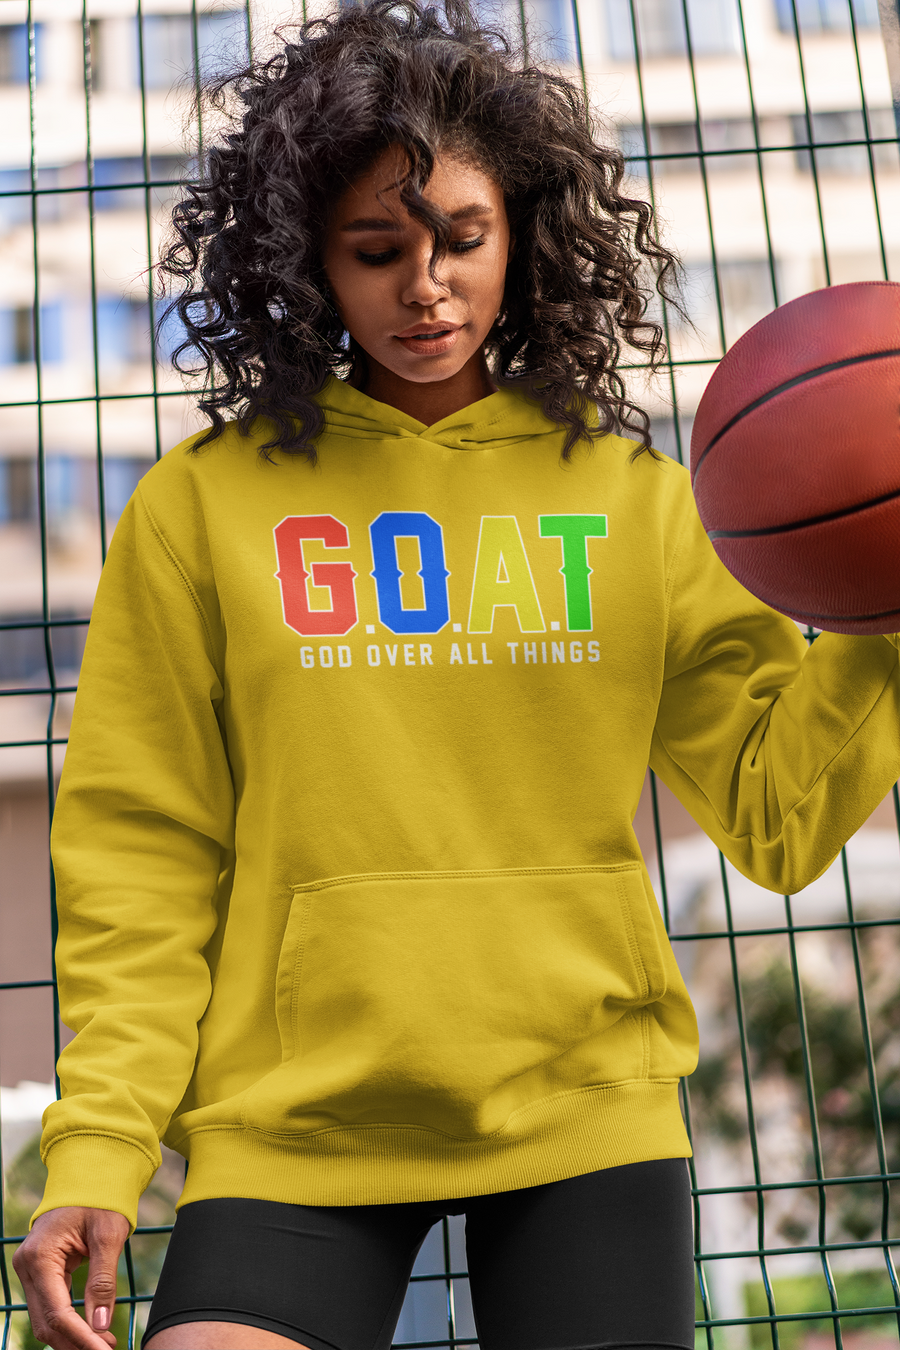 G.O.A.T (God over all things)  (Multi color print) Hoodie